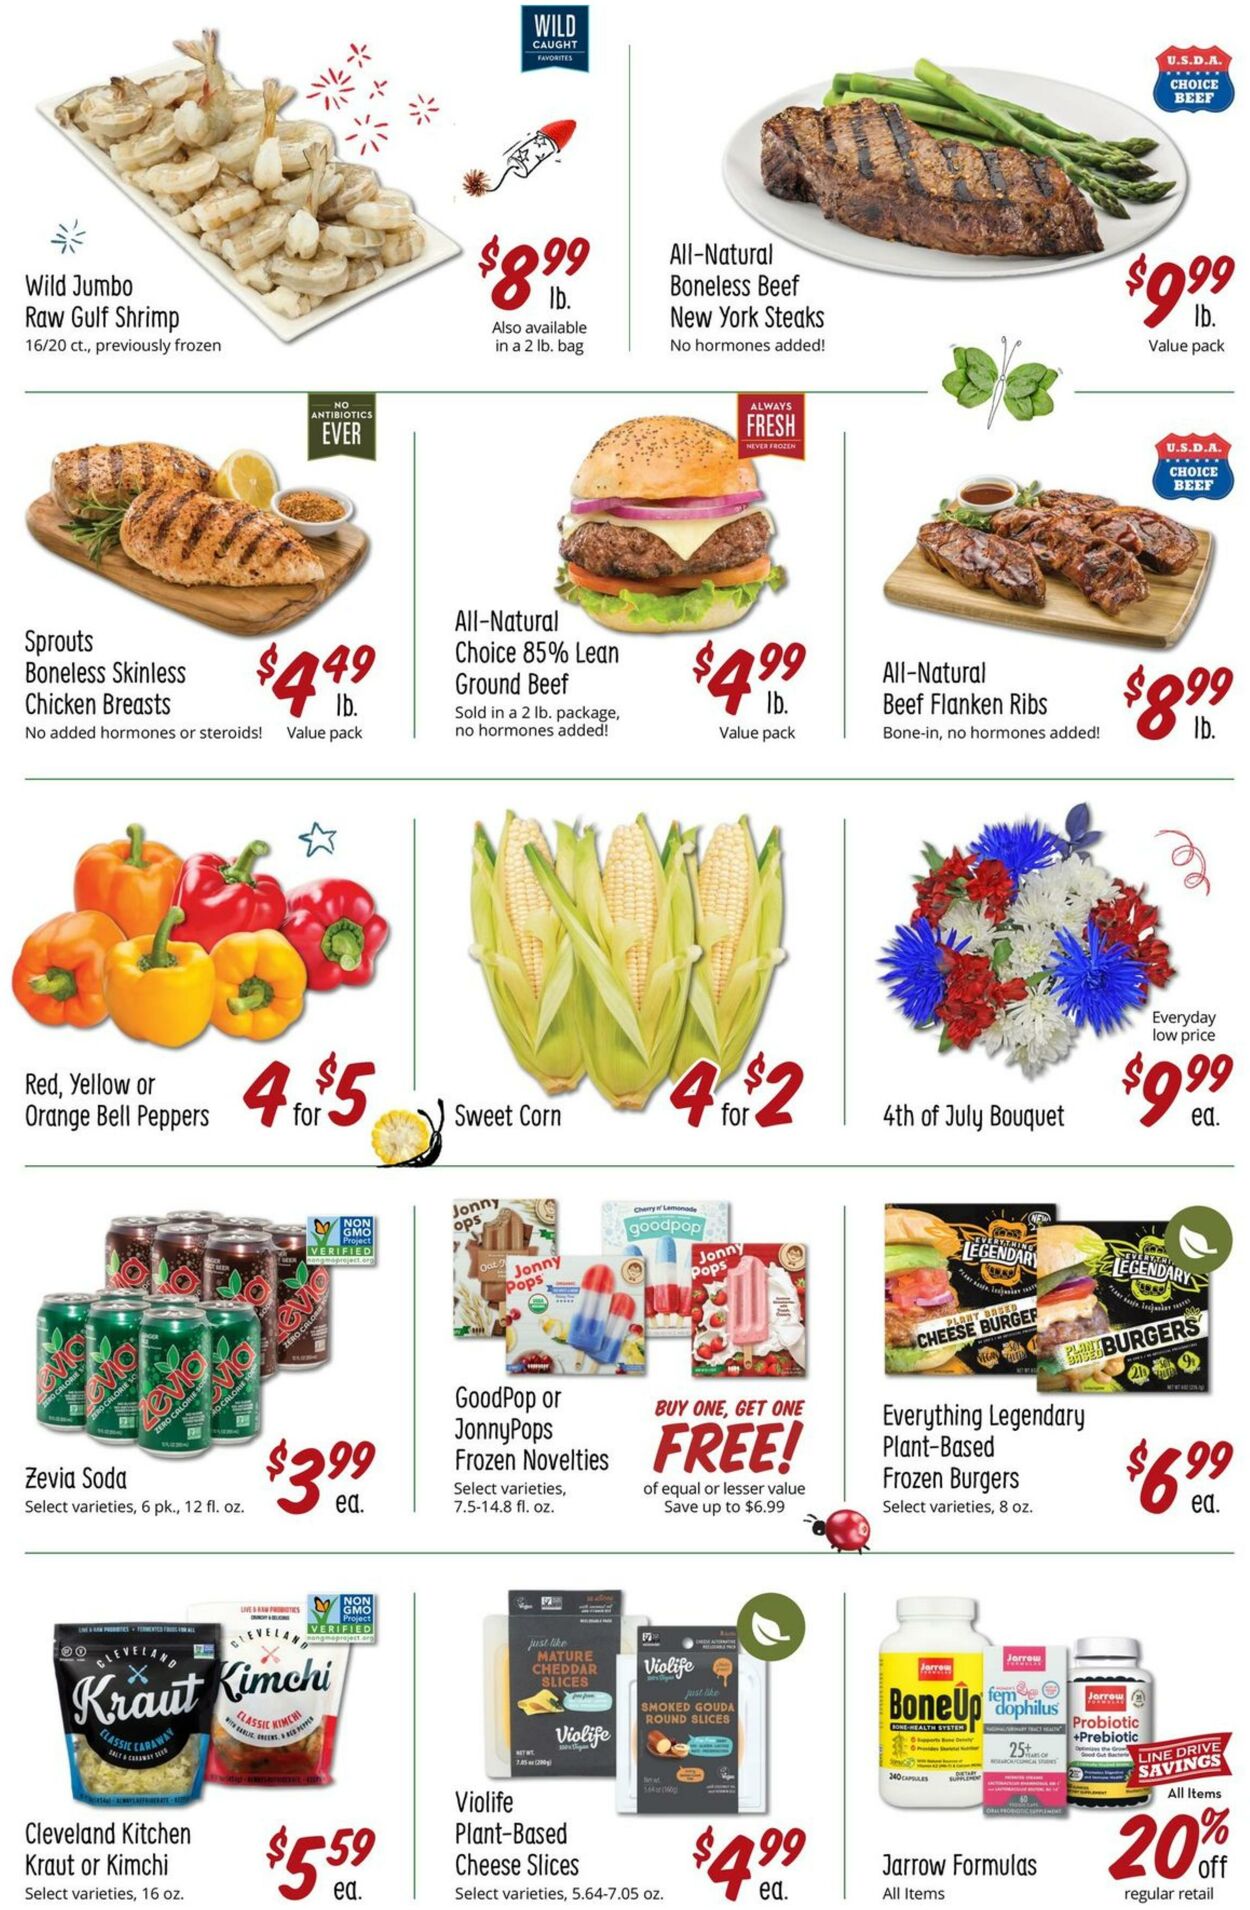 Weekly ad Sprouts 06/29/2022 - 07/05/2022